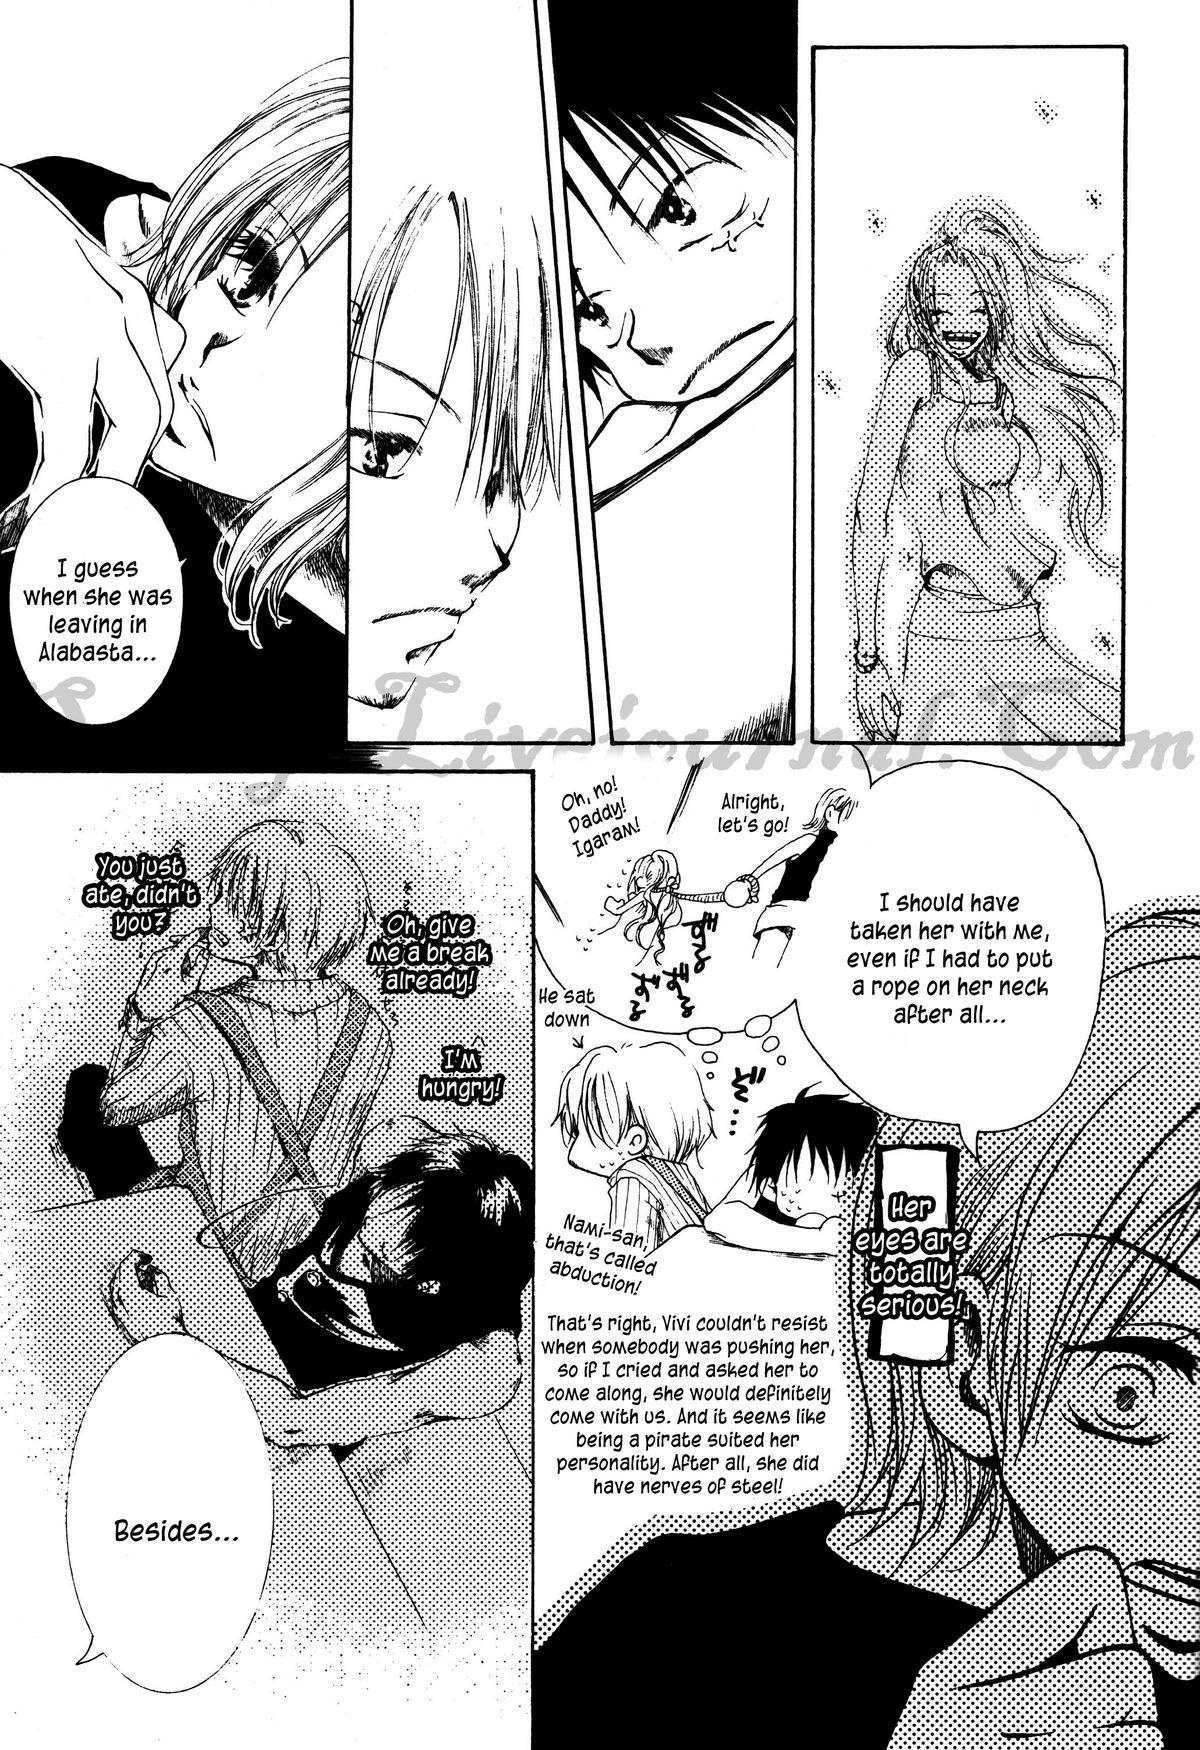 Classic Hologram - One piece Ejaculation - Page 9